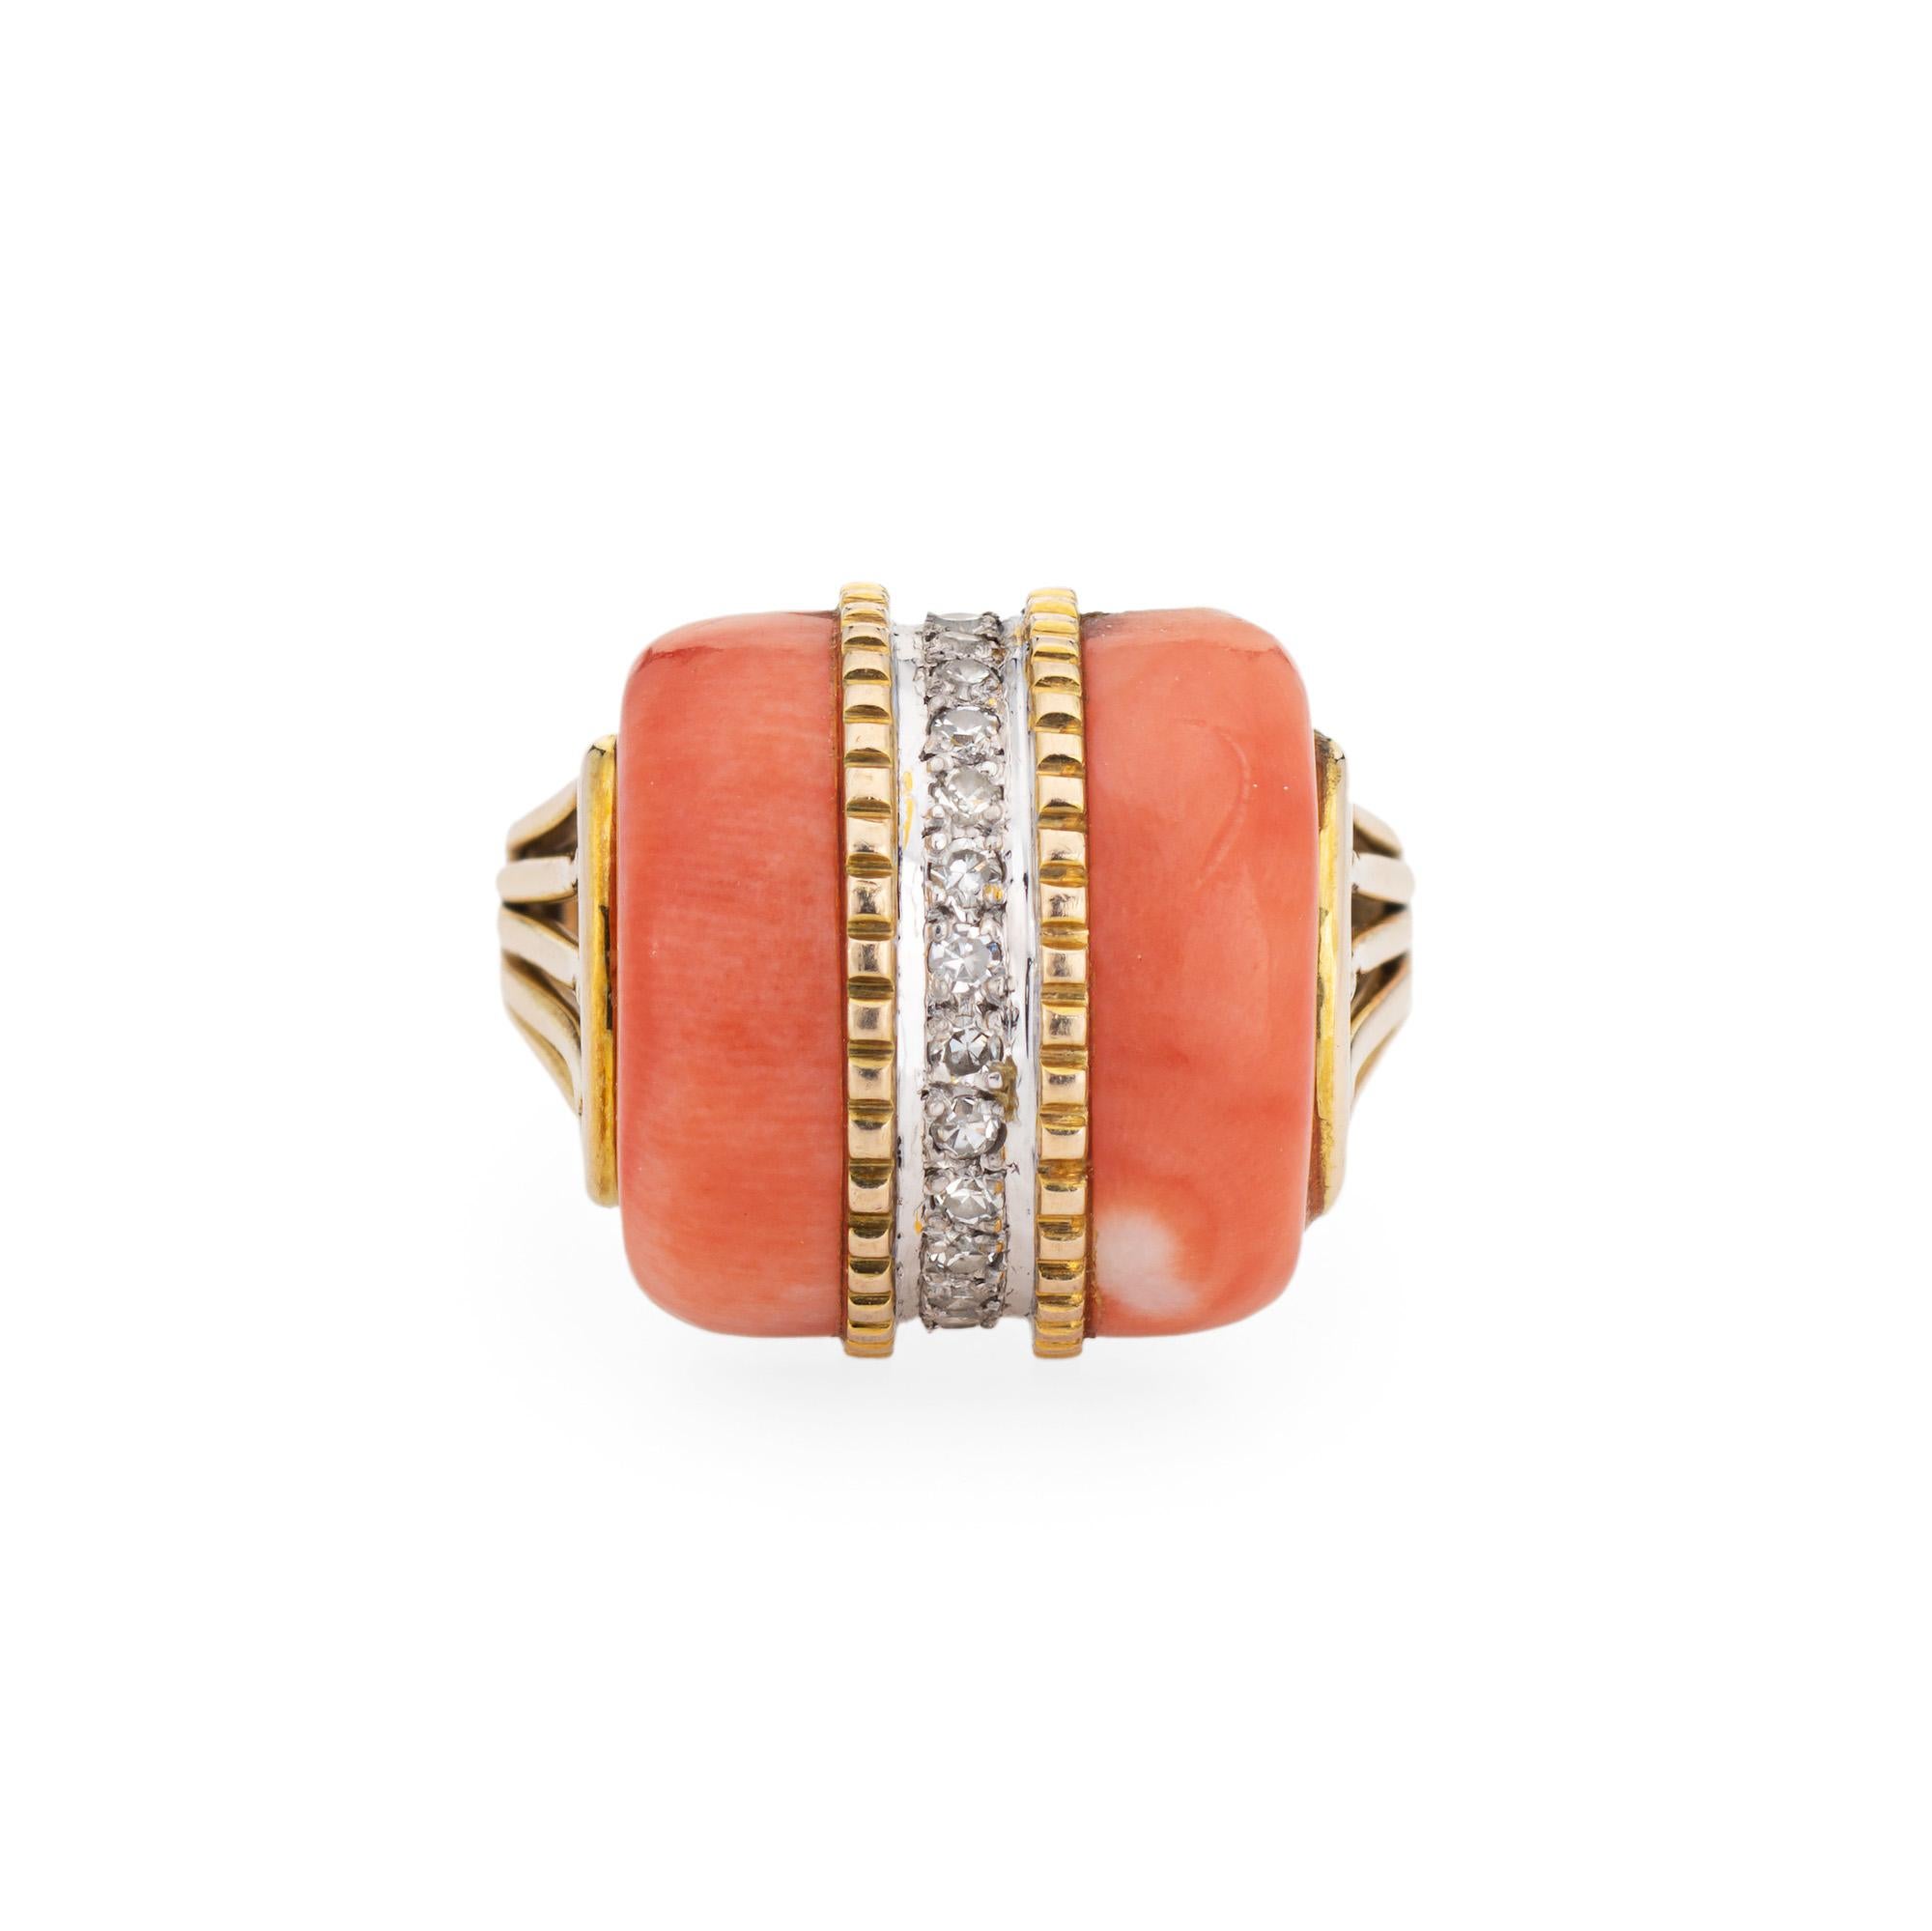 Stylish coral & diamond dome ring crafted in 14 karat yellow gold (circa 1970s). 

Cabochon cut coral measures 23mm x 4mm. 14 single cut diamonds total an estimated 0.07 carats (estimated at H-I color and SI1-I1 clarity). The coral is in very good